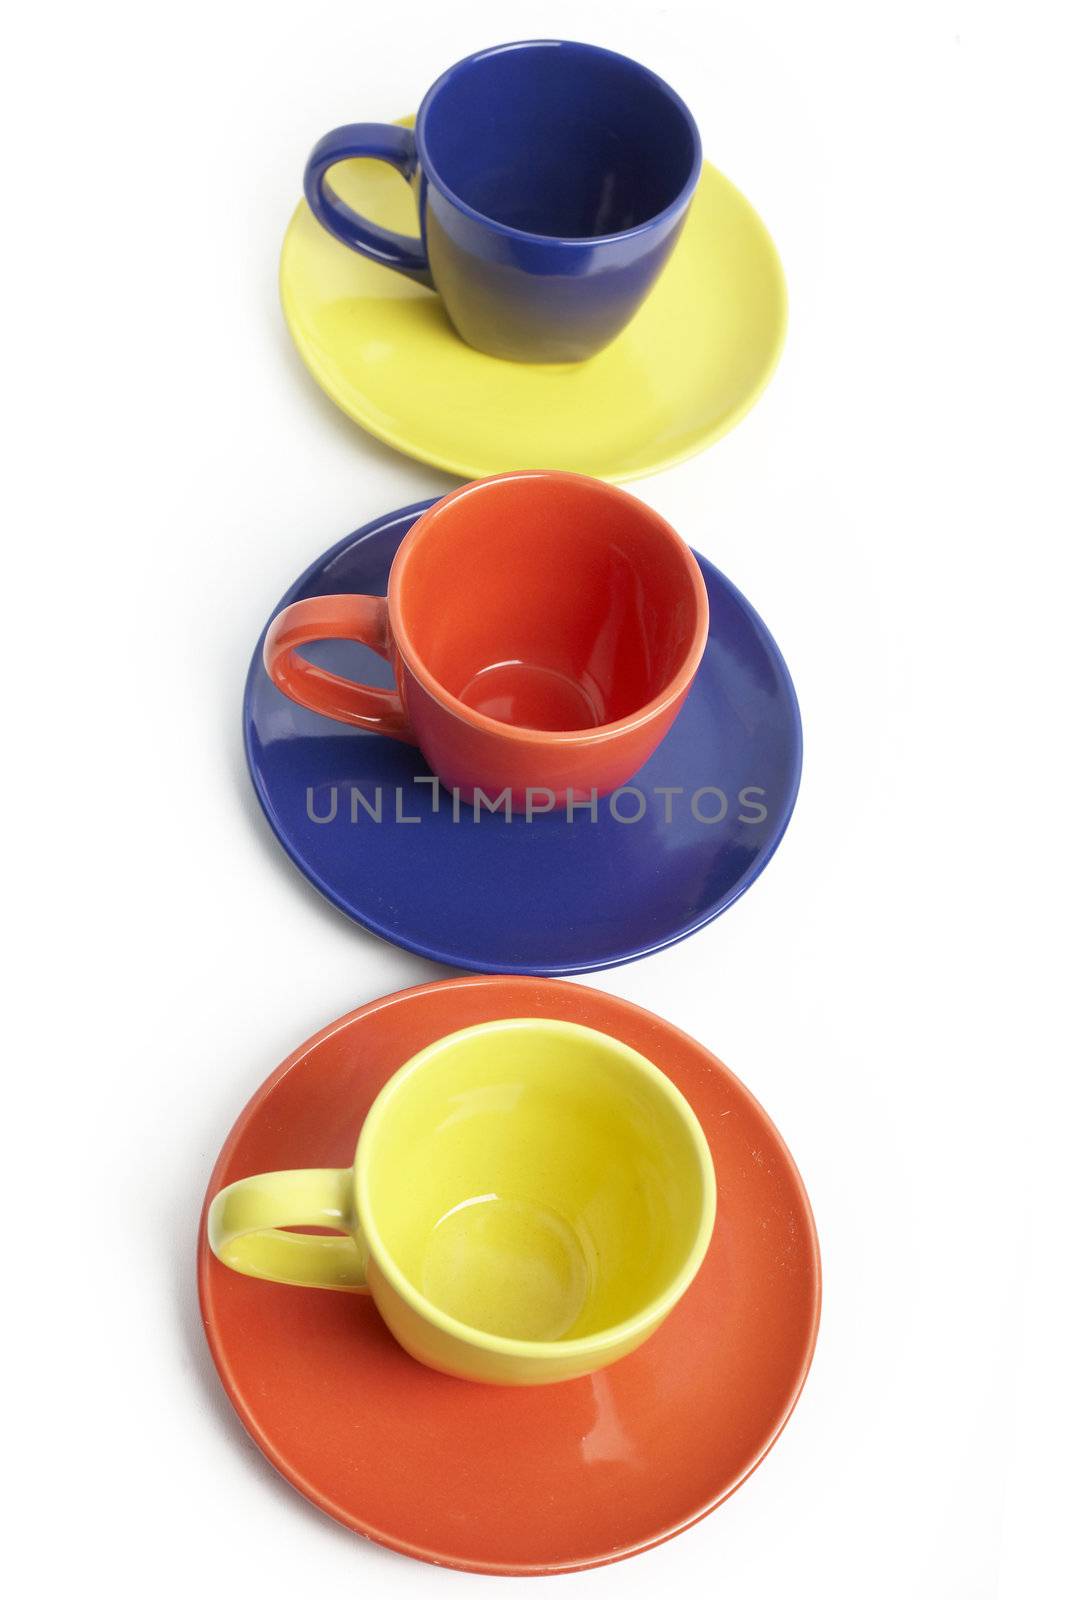 An image of a varicoloured cups